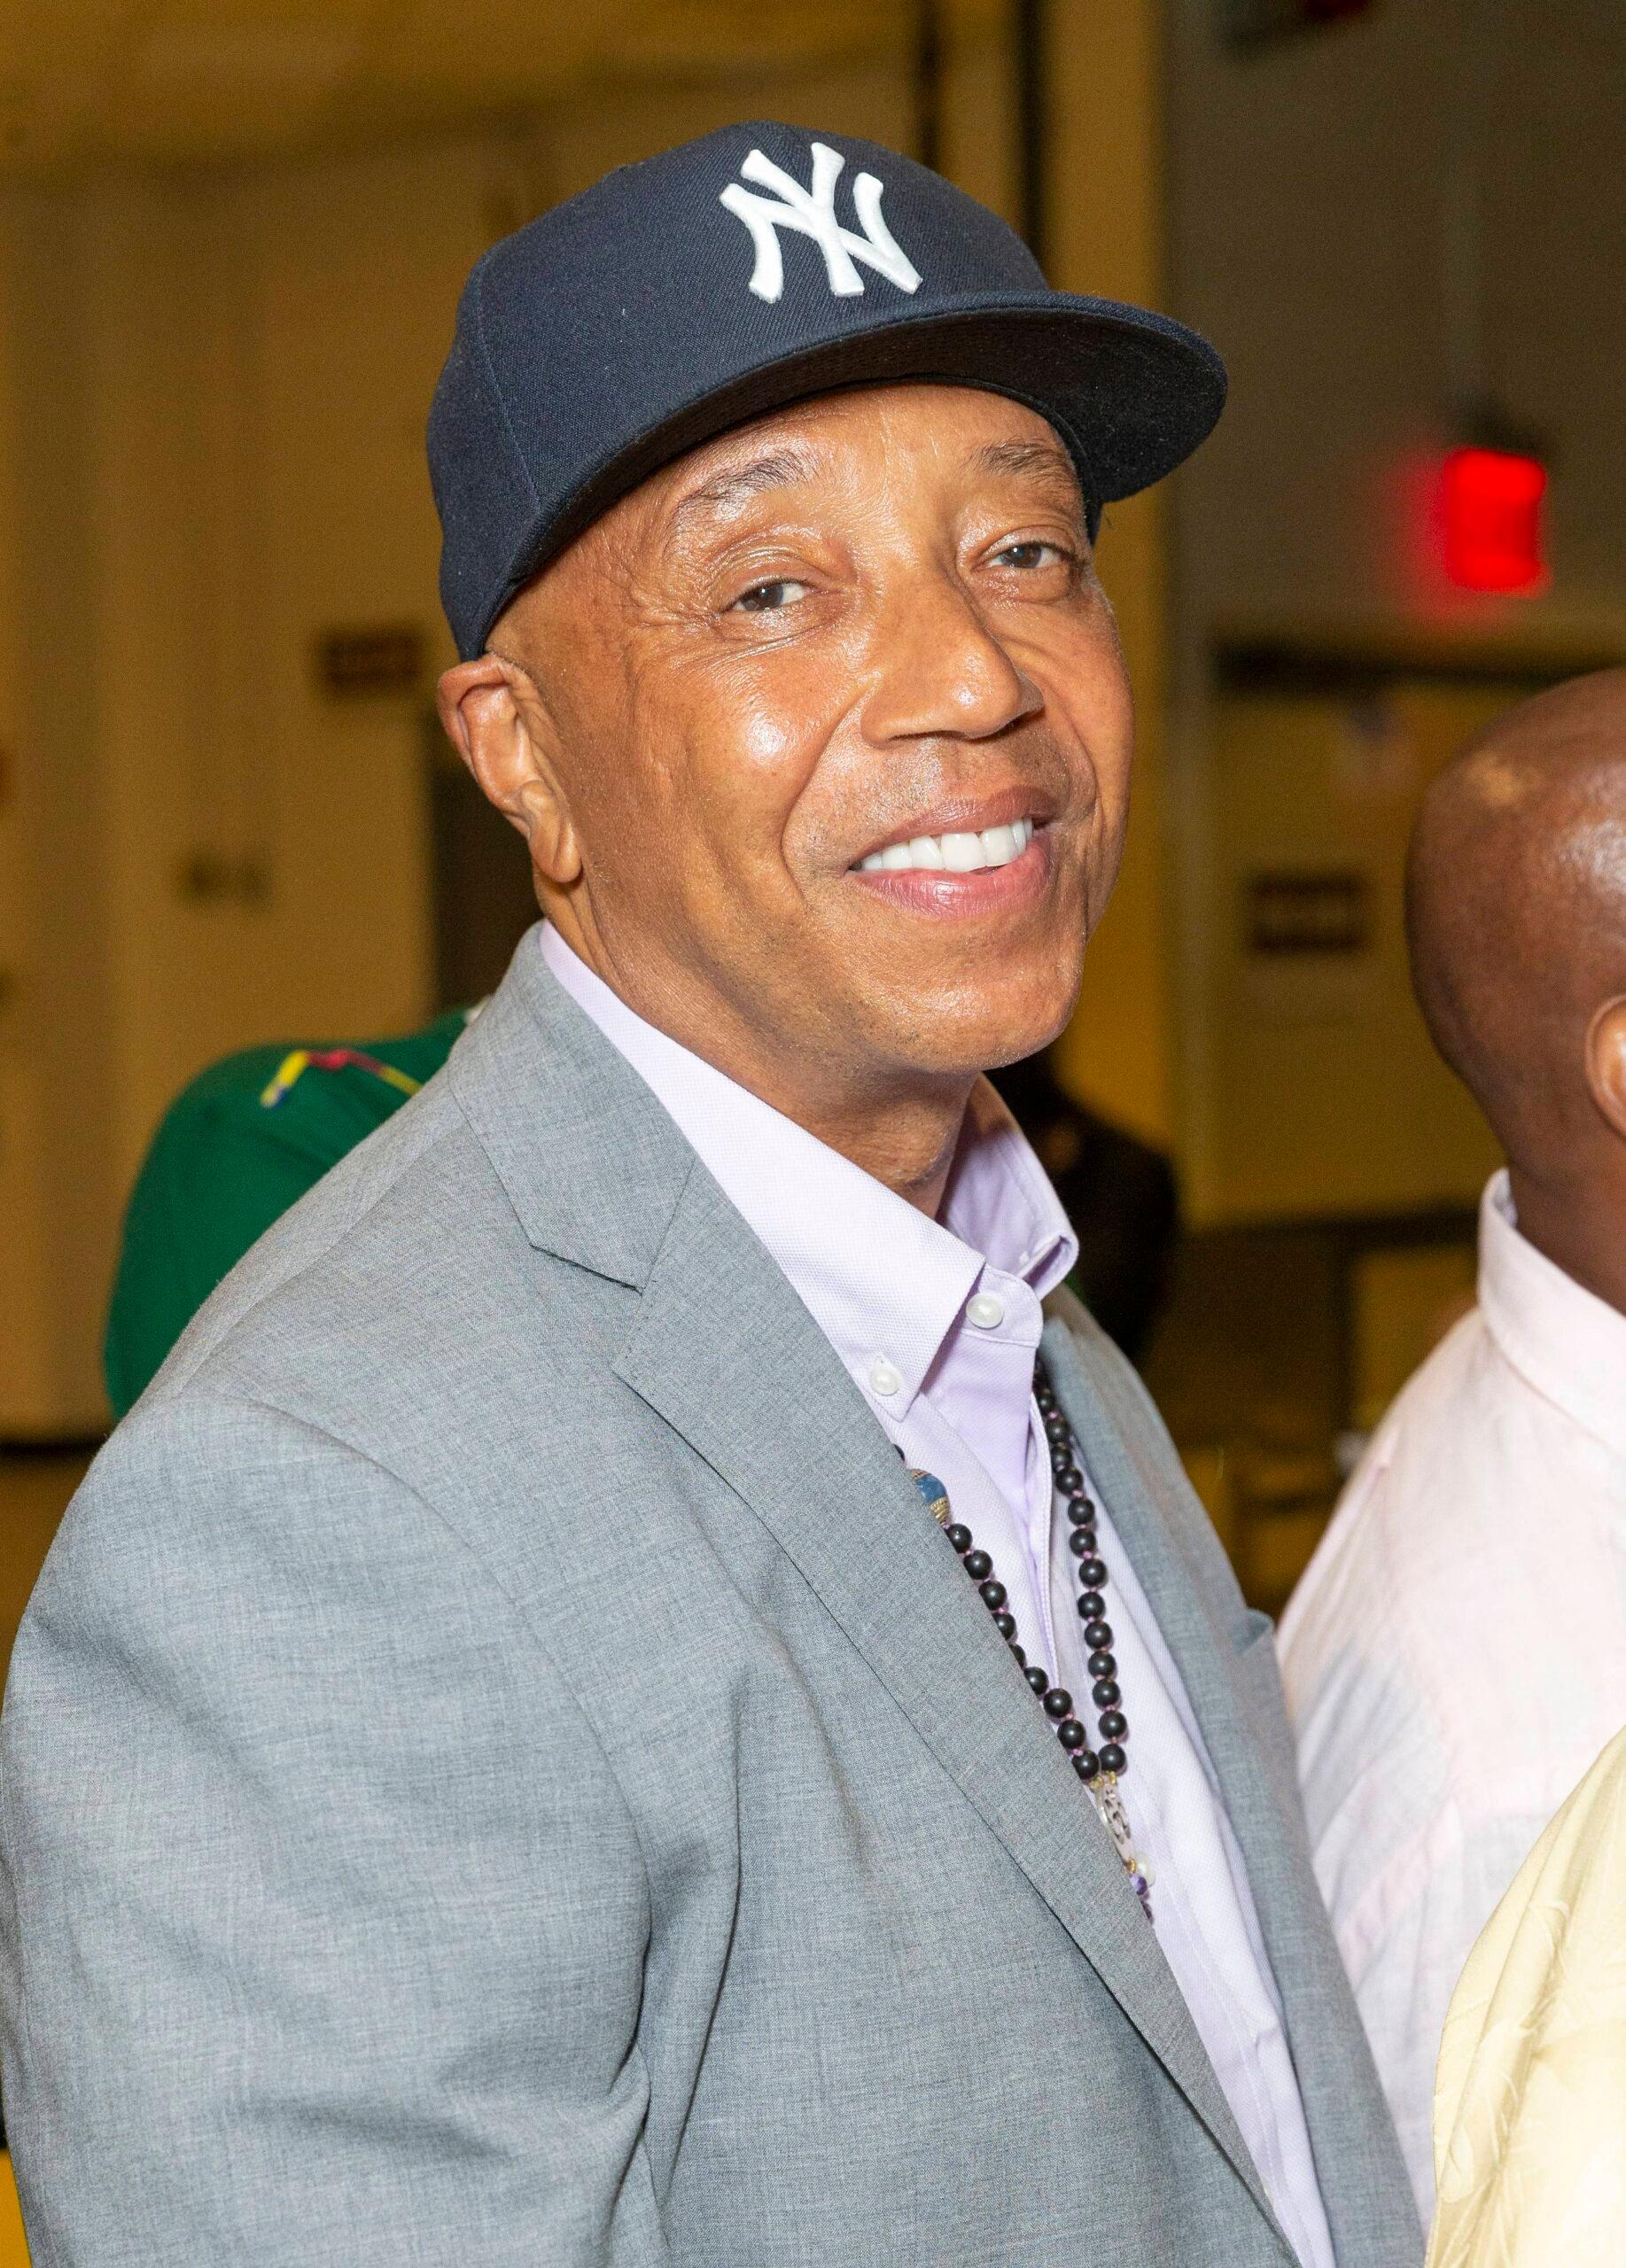 Russell Simmons at STARZ Power Season 6 premiere